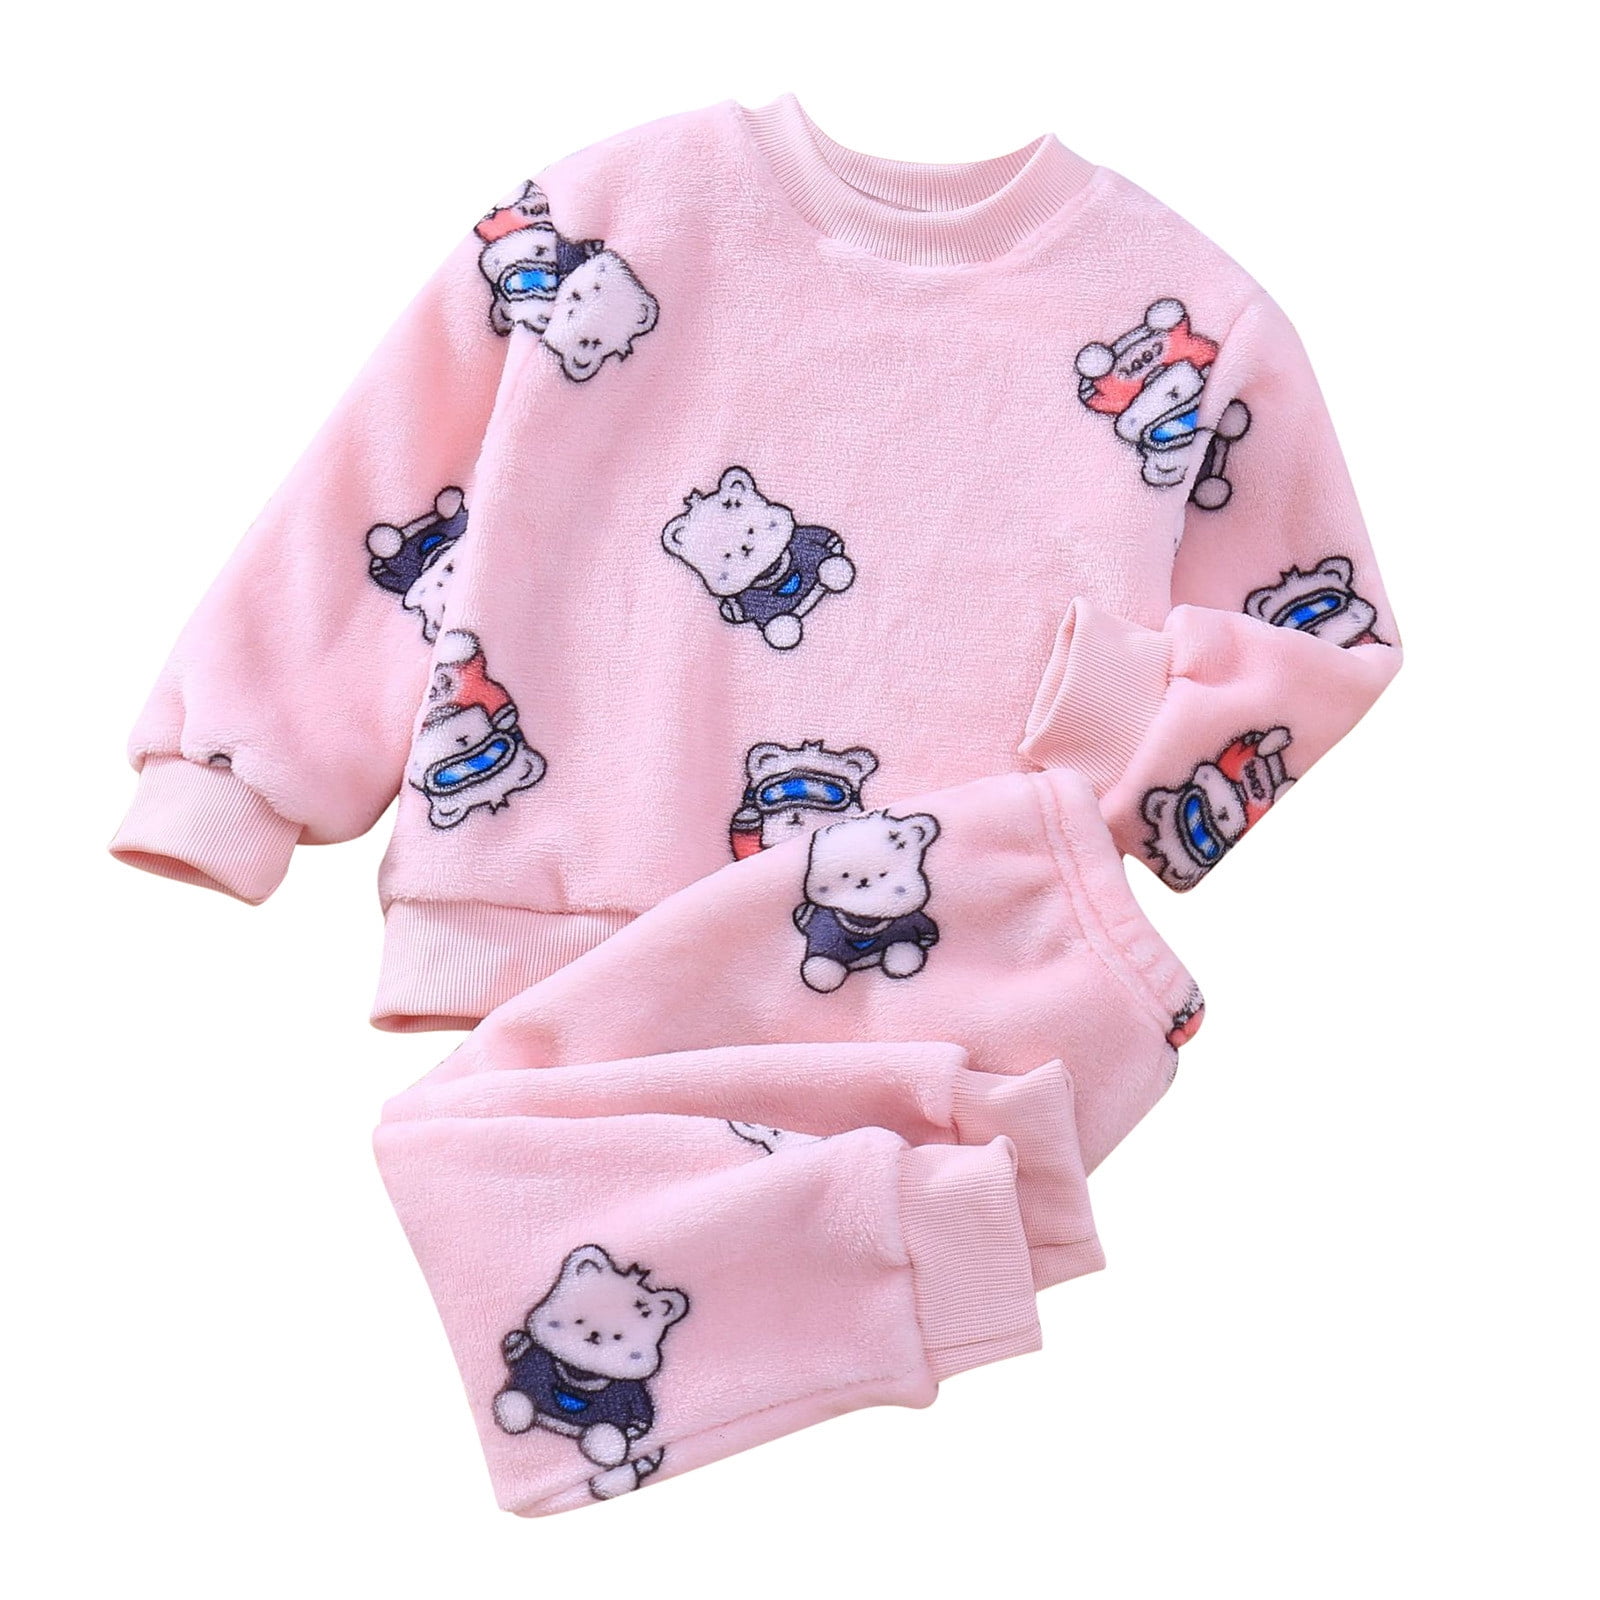 Toddler Girls Outfit Sets 2 Piece Winter Fleece Pajama Warm Flannel ...